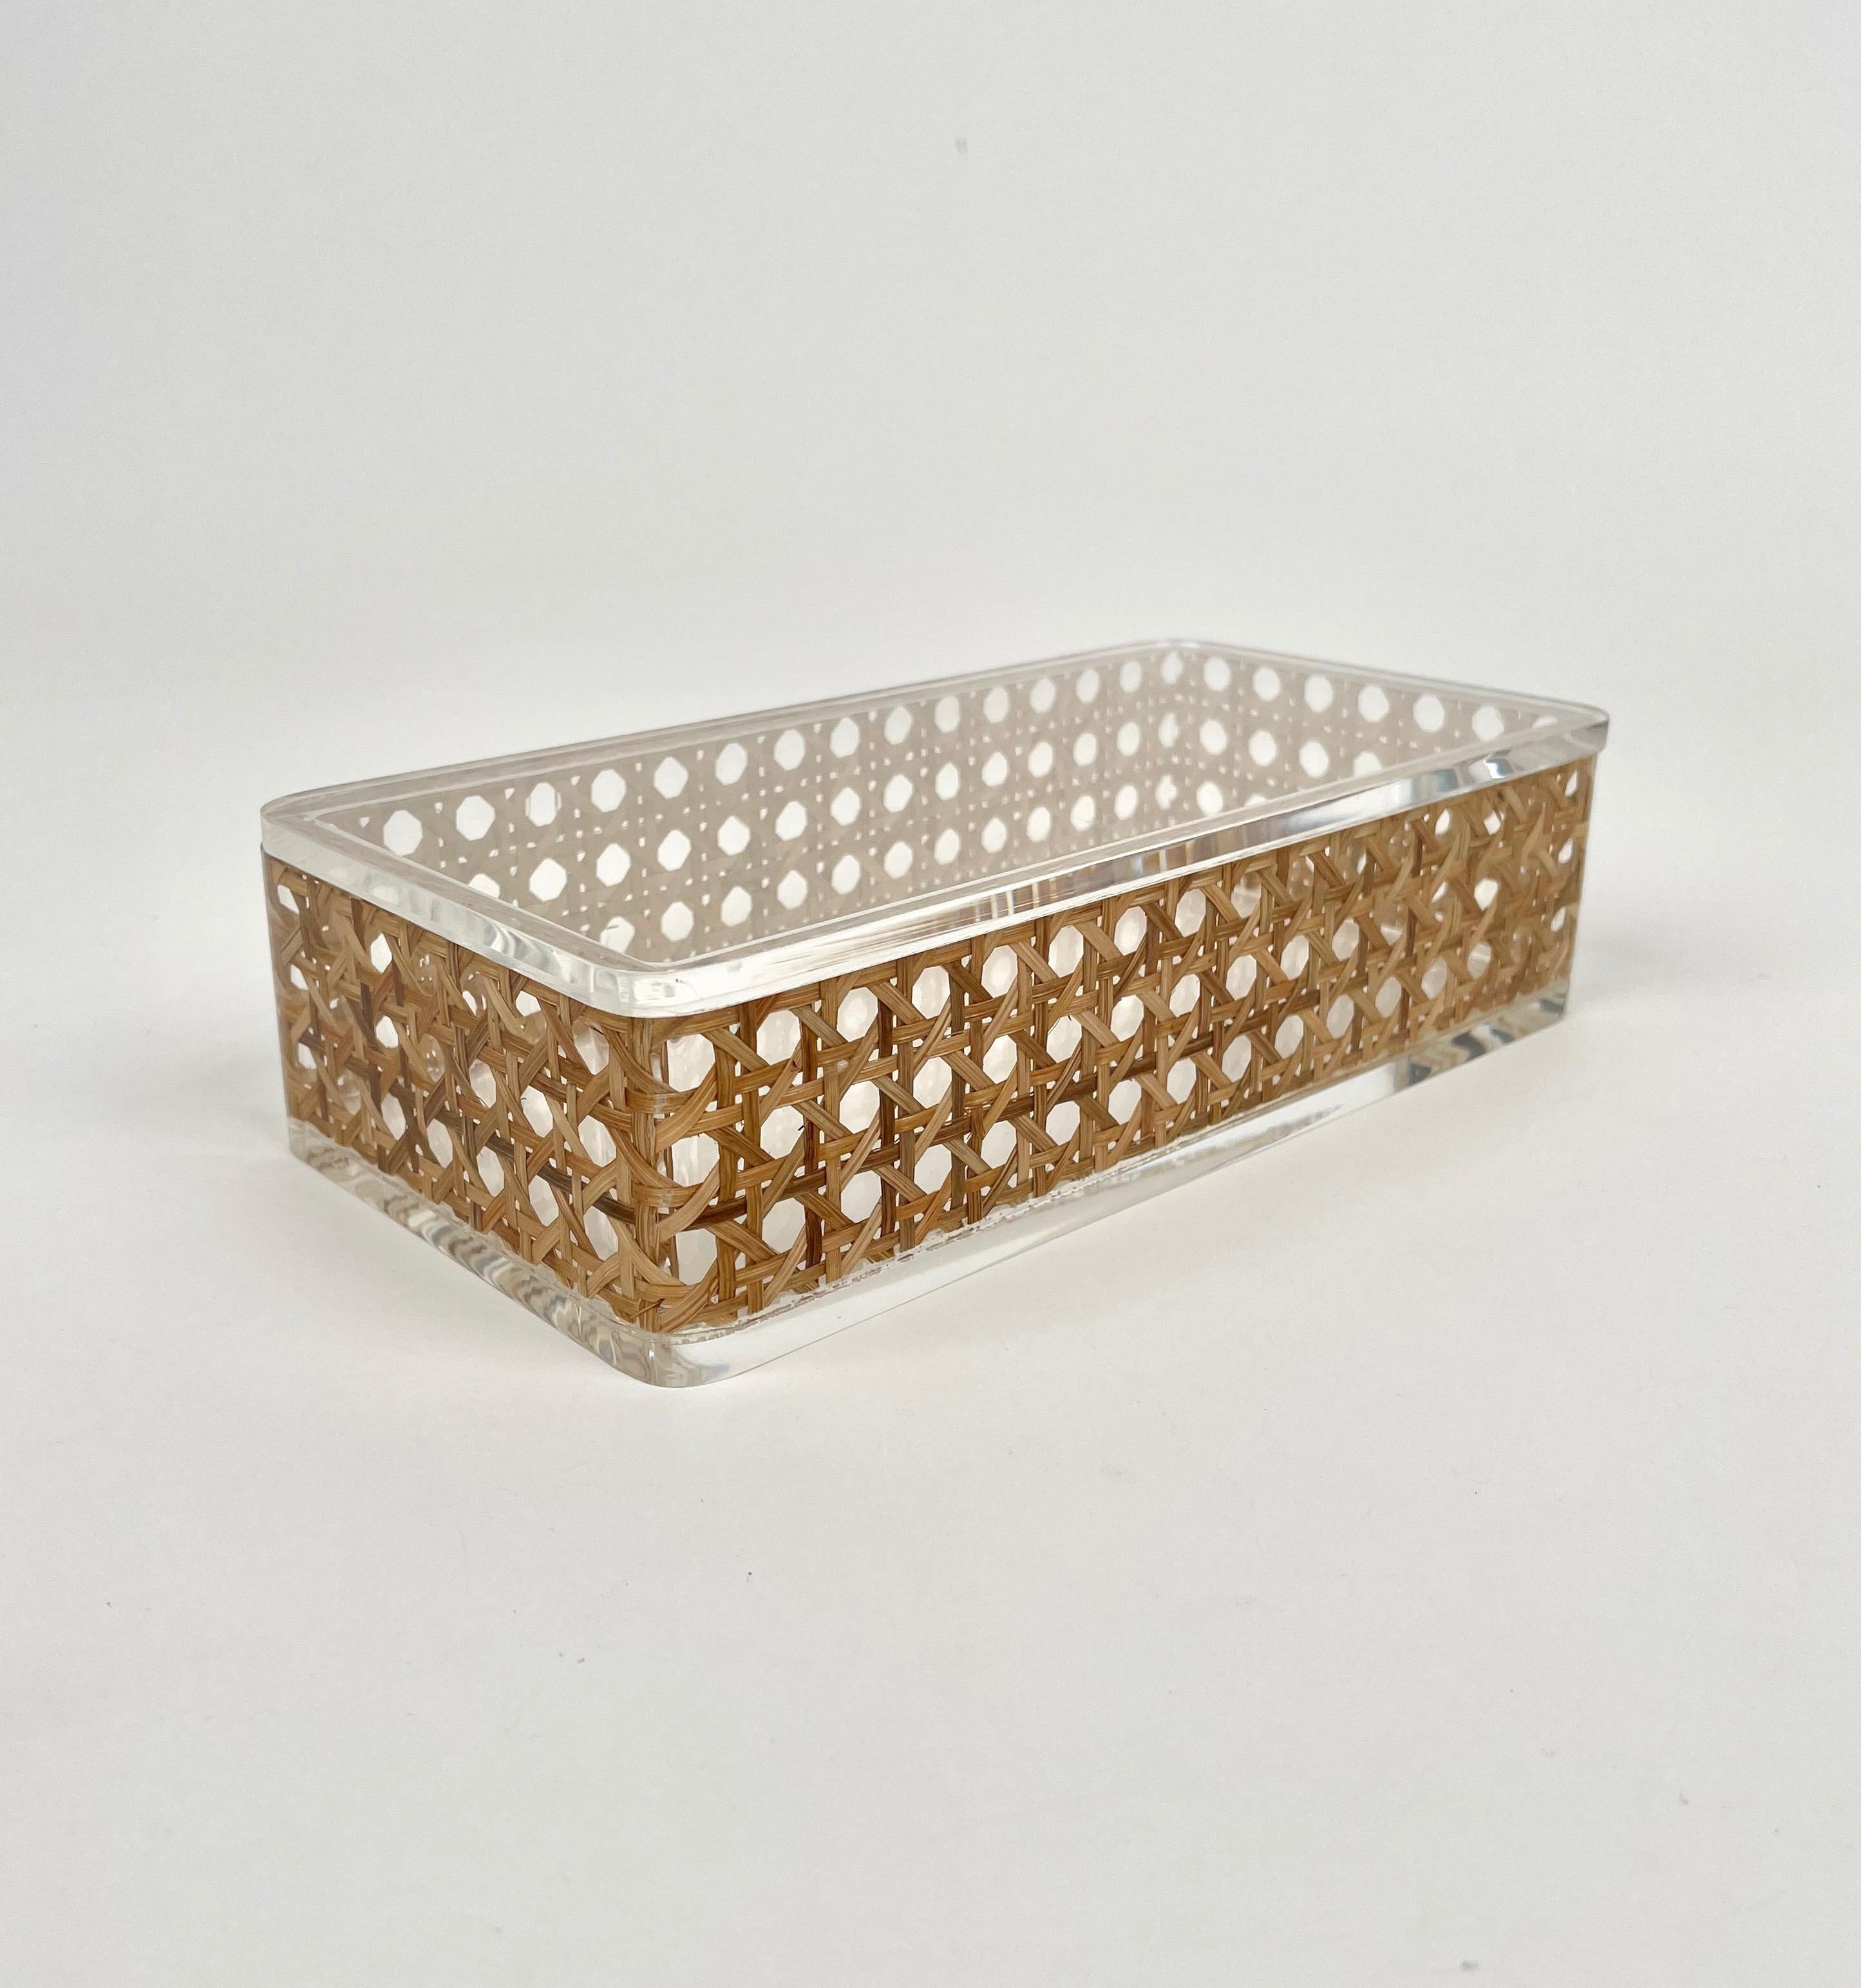 Wicker Rectangular Box Lucite and Rattan Christian Dior Home Style, Italy, 1970s